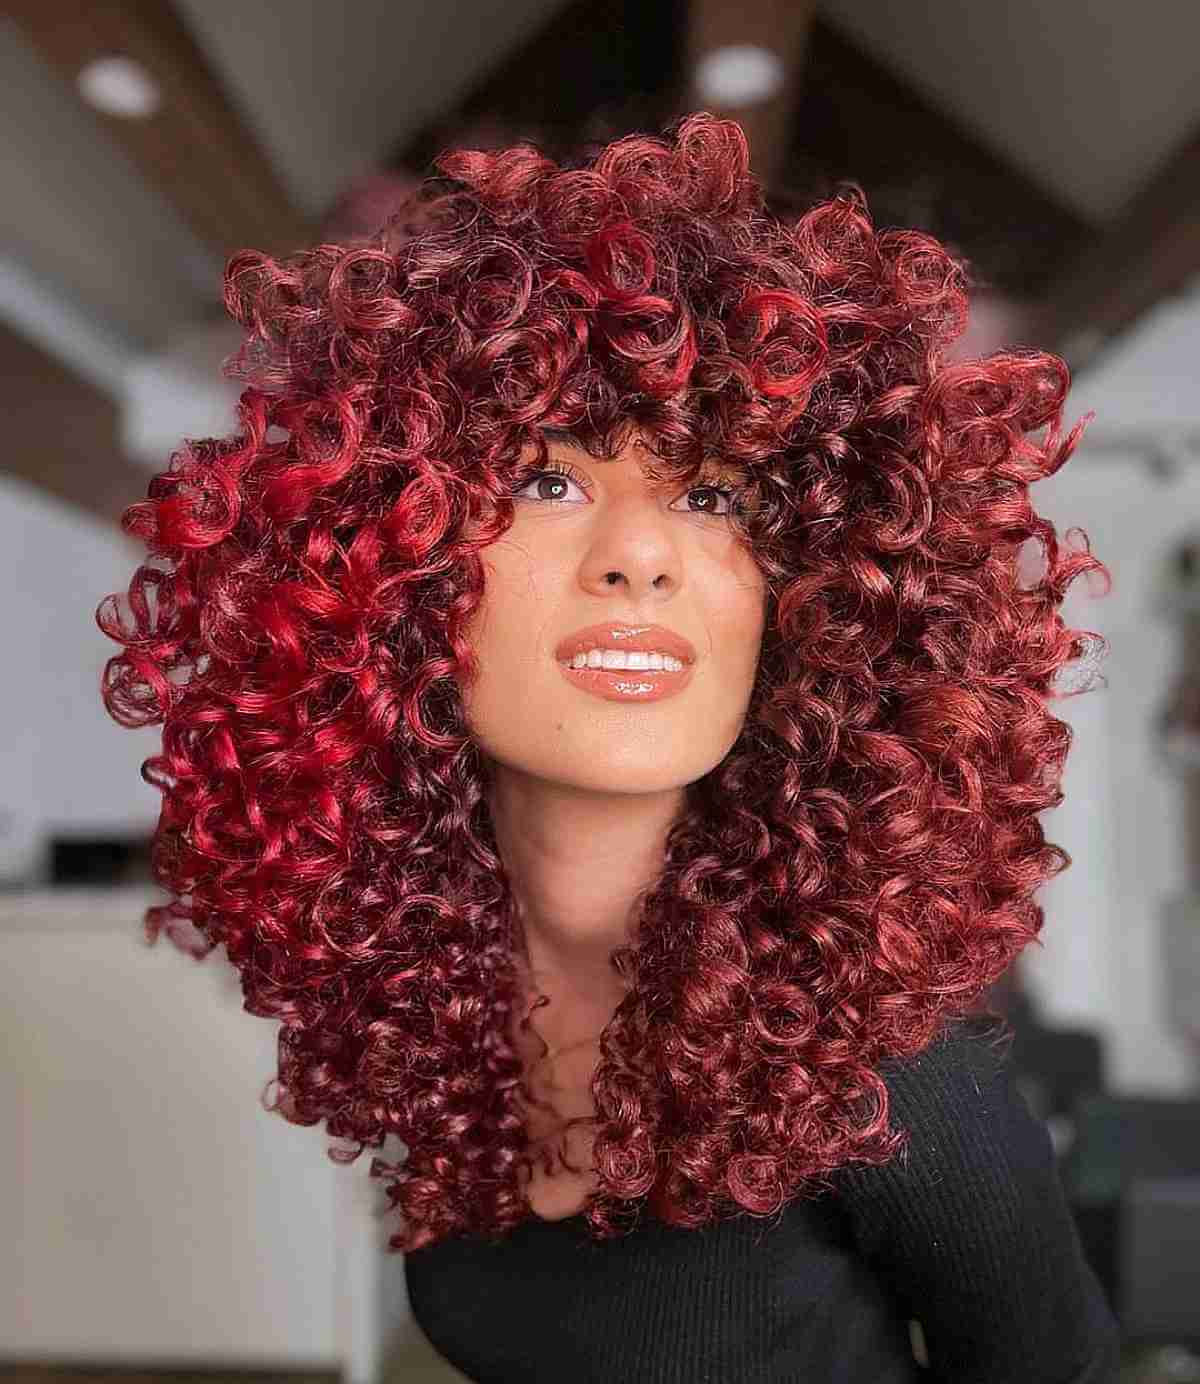 Naturally curly red shoulder length hair